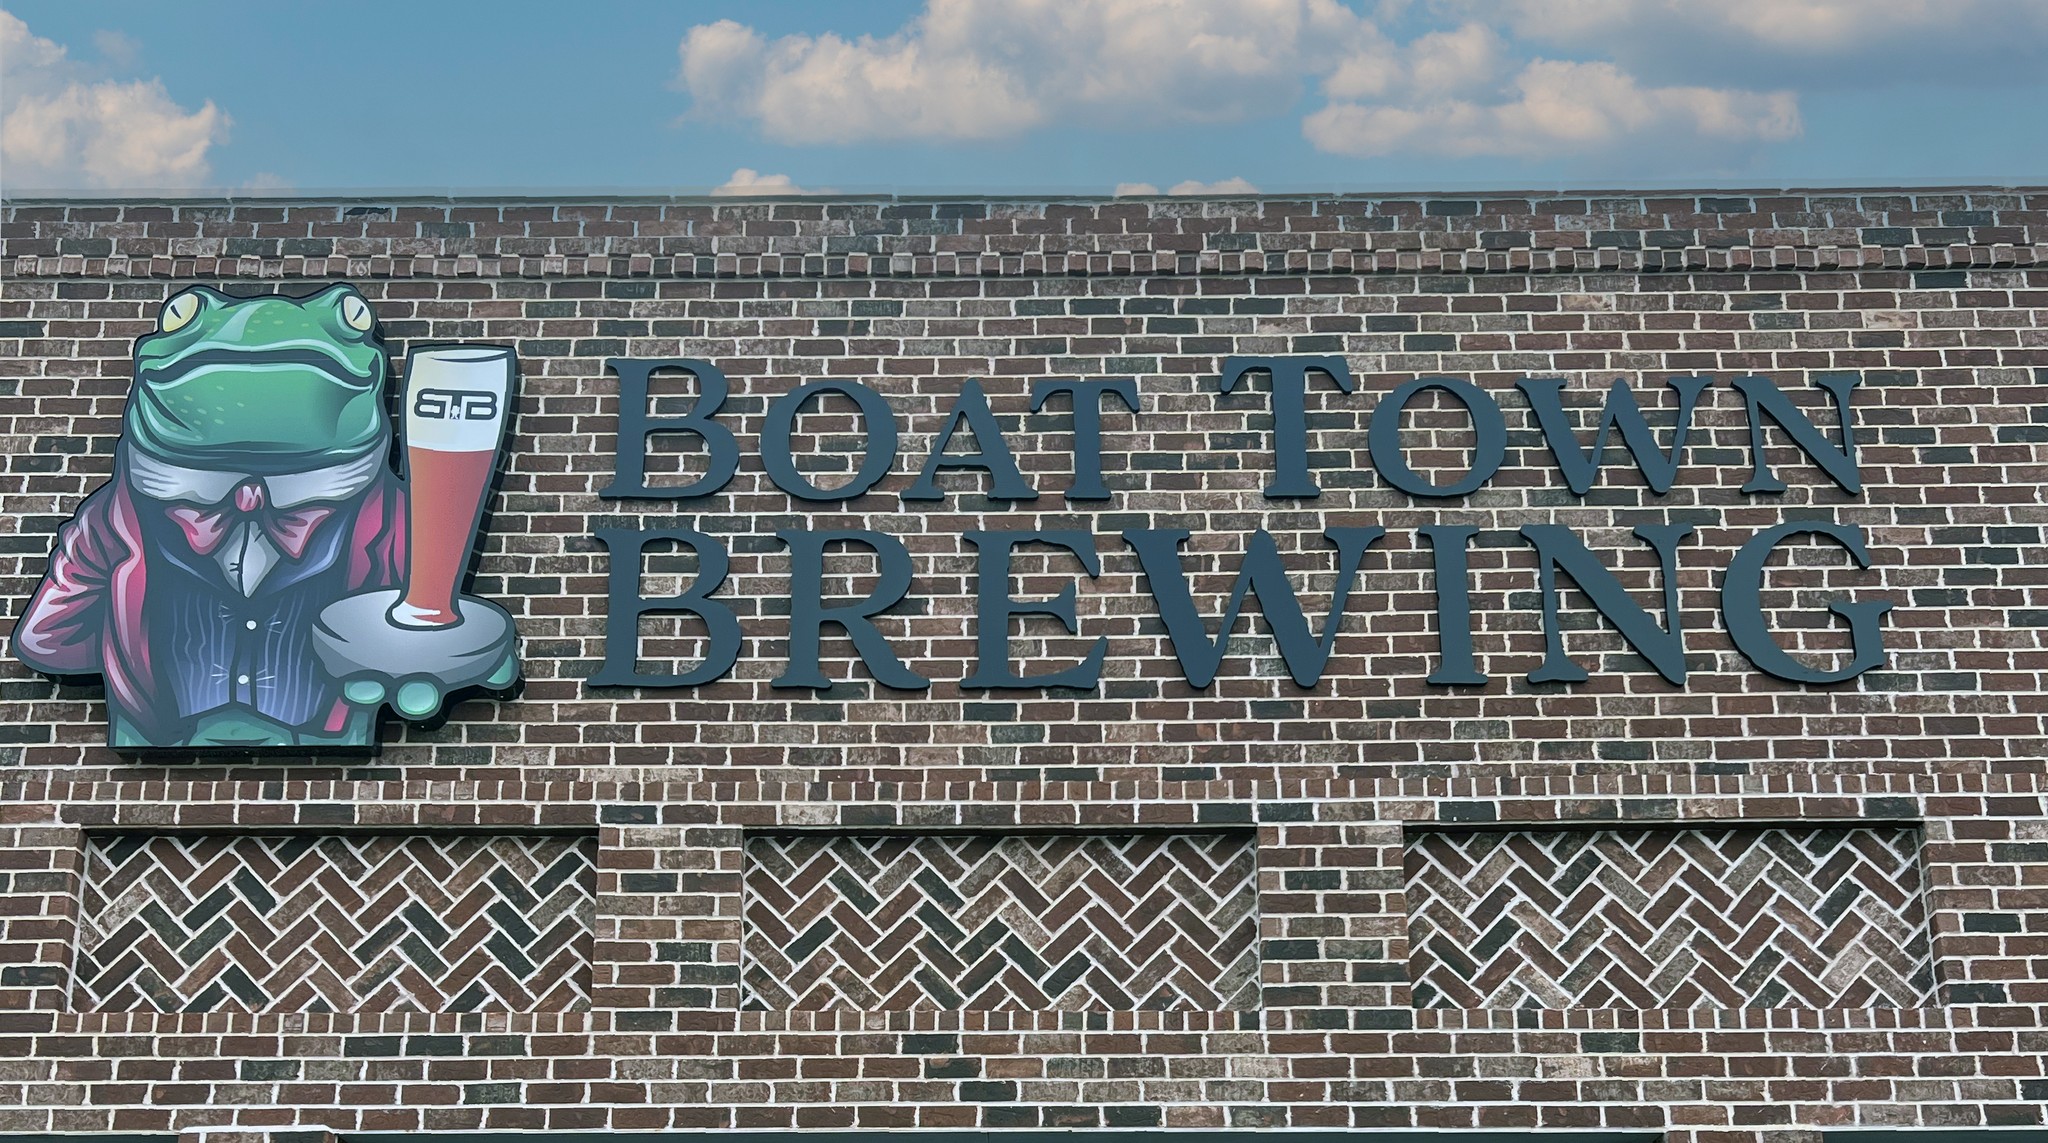 Boat Town Brewing